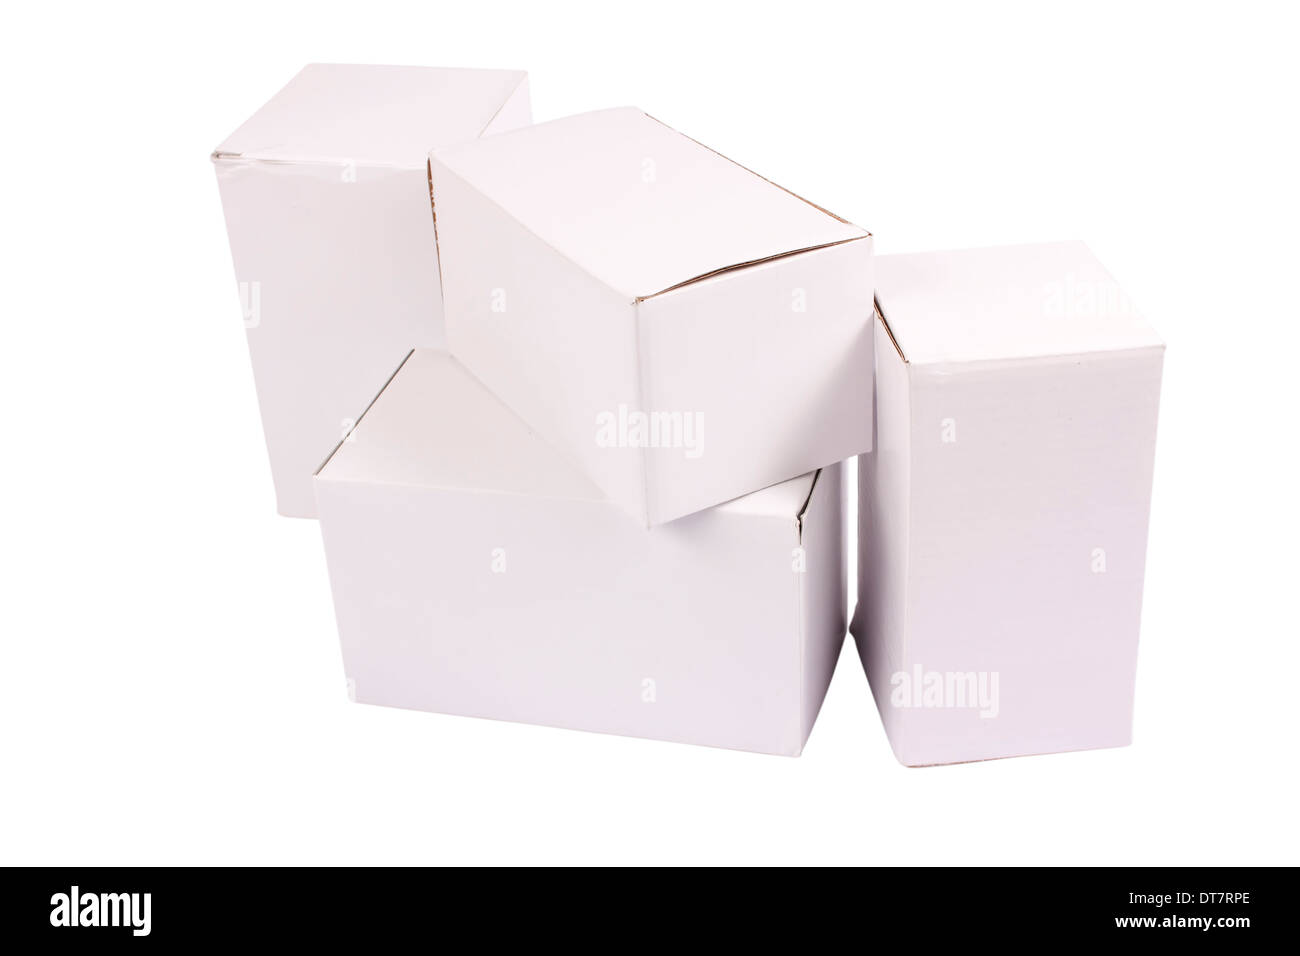 Some closed cardboard cartons isolated on white background Stock Photo